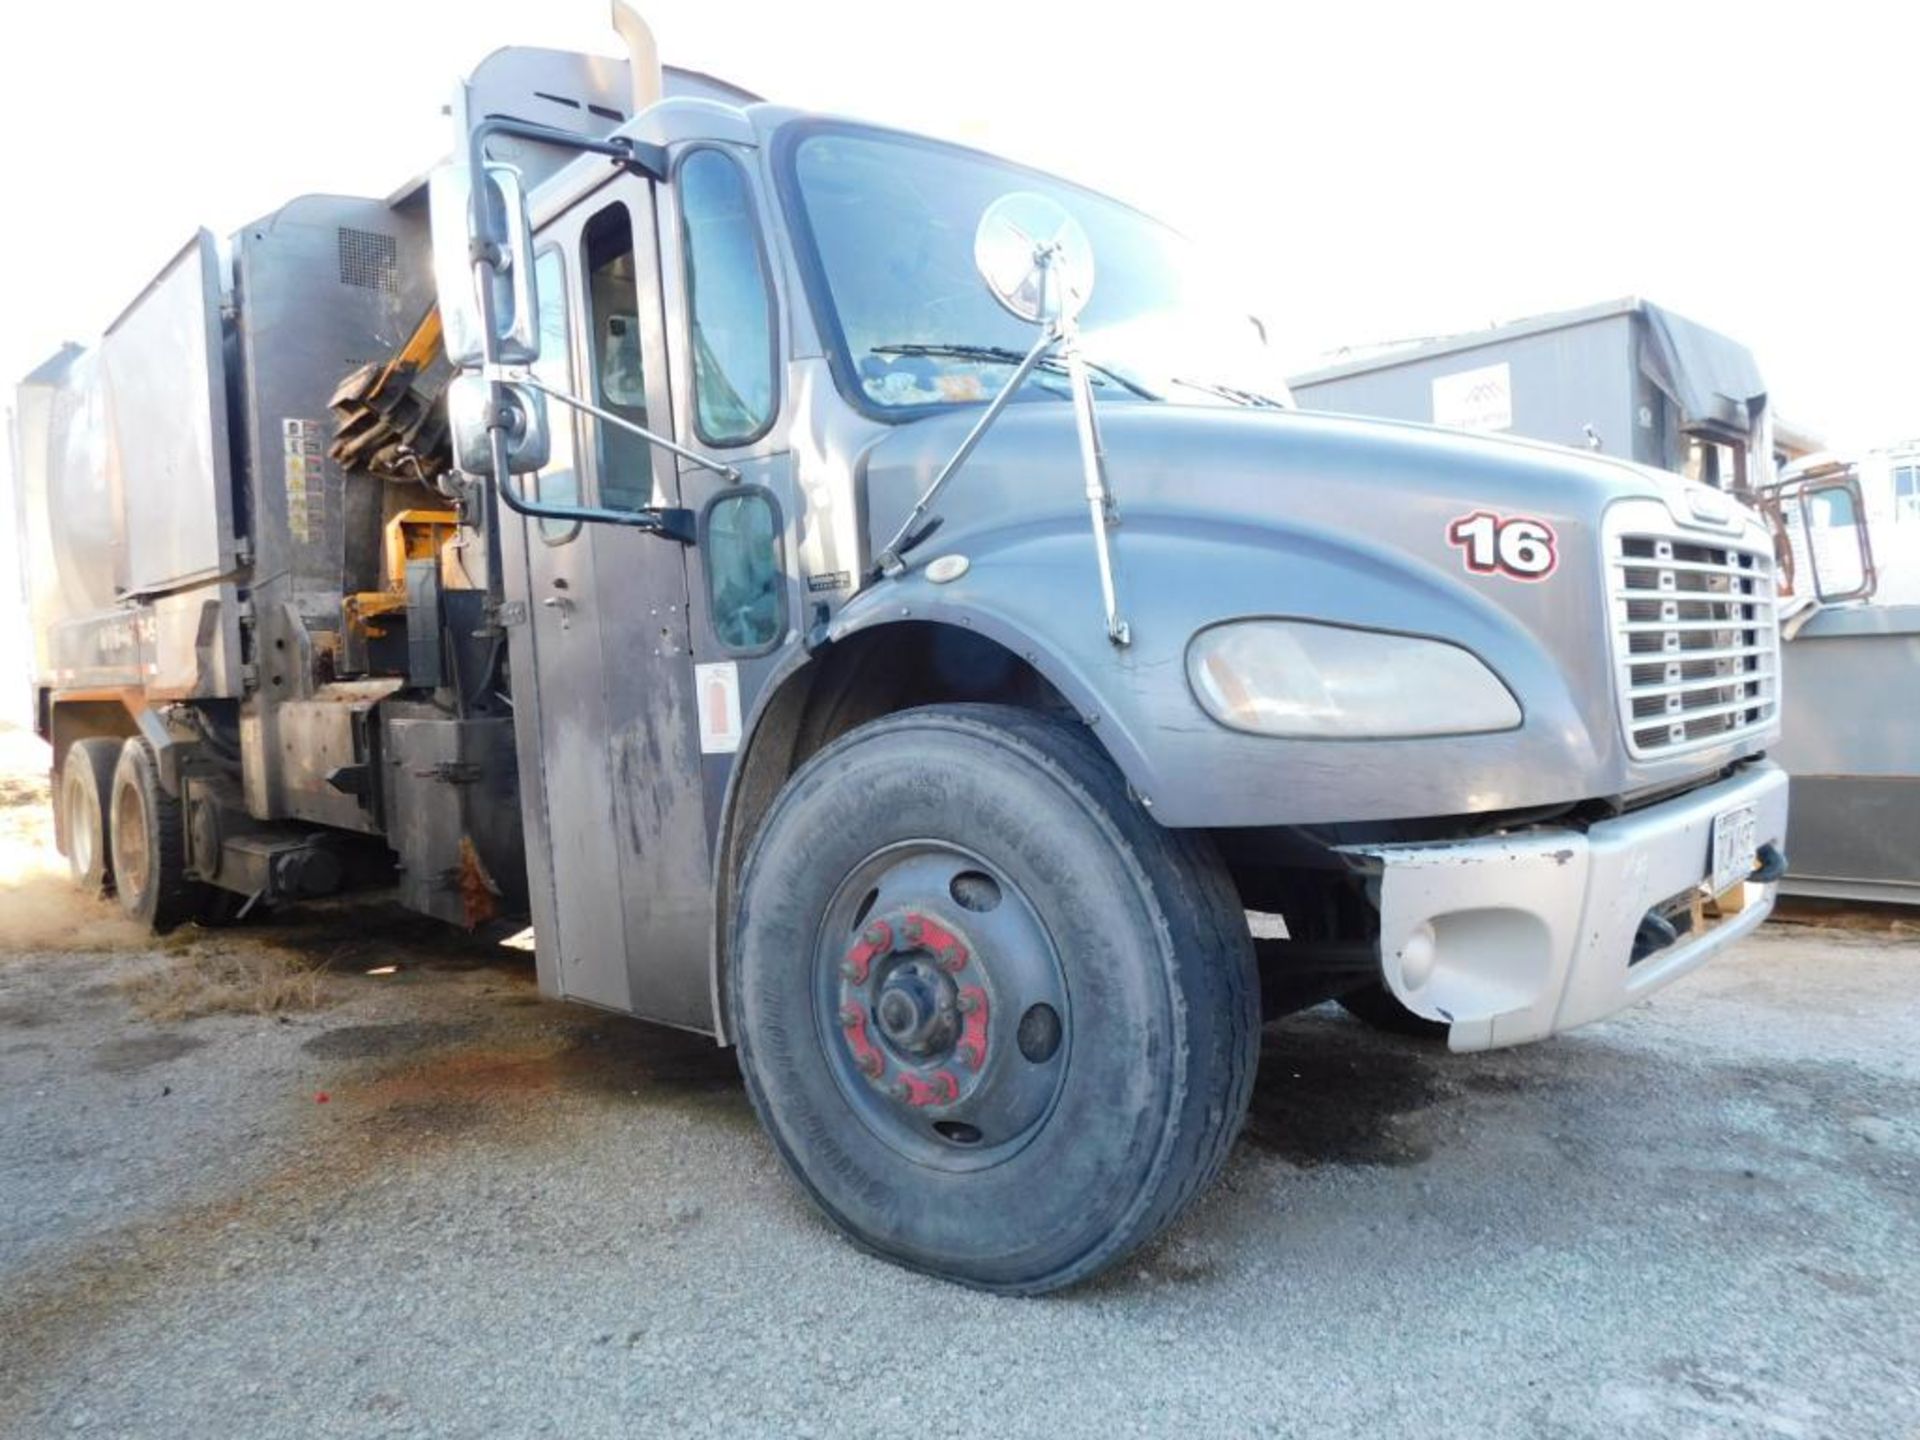 2009 Freightliner T.A. Automated Side Loader Garbage Truck Model Business Class M2, VIN - Image 3 of 26